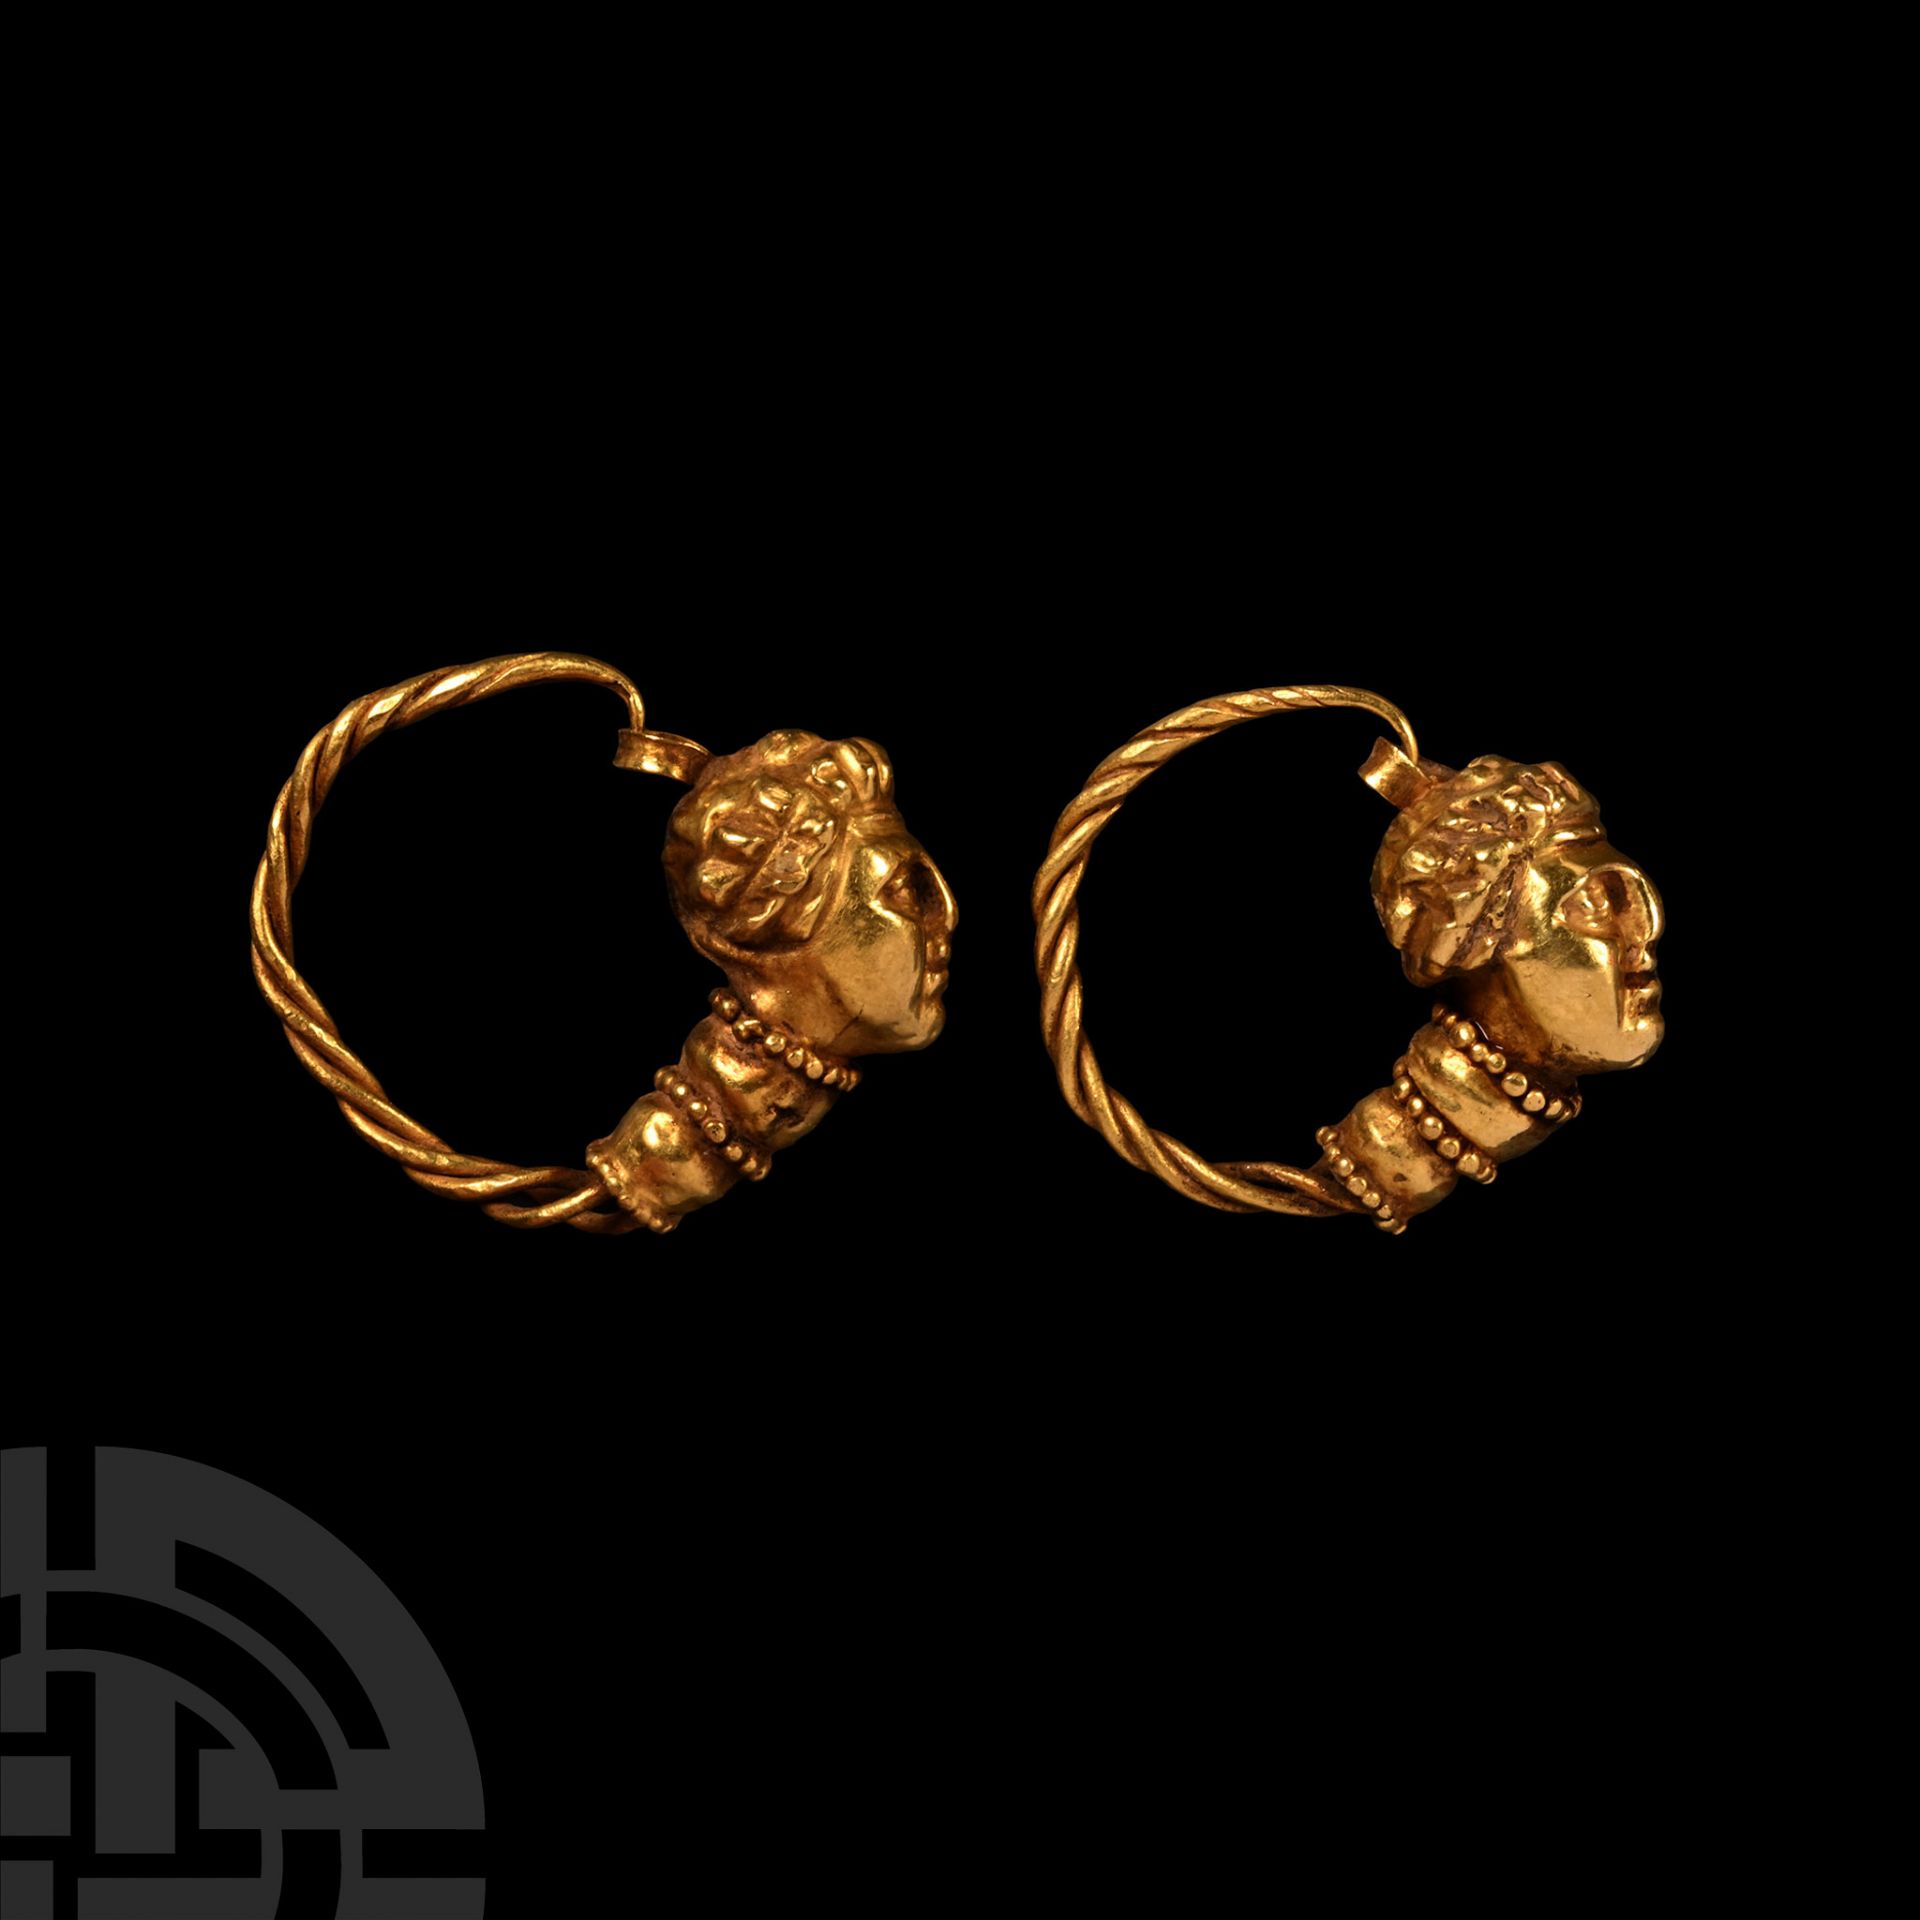 Hellenistic Gold Earrings with Female Heads